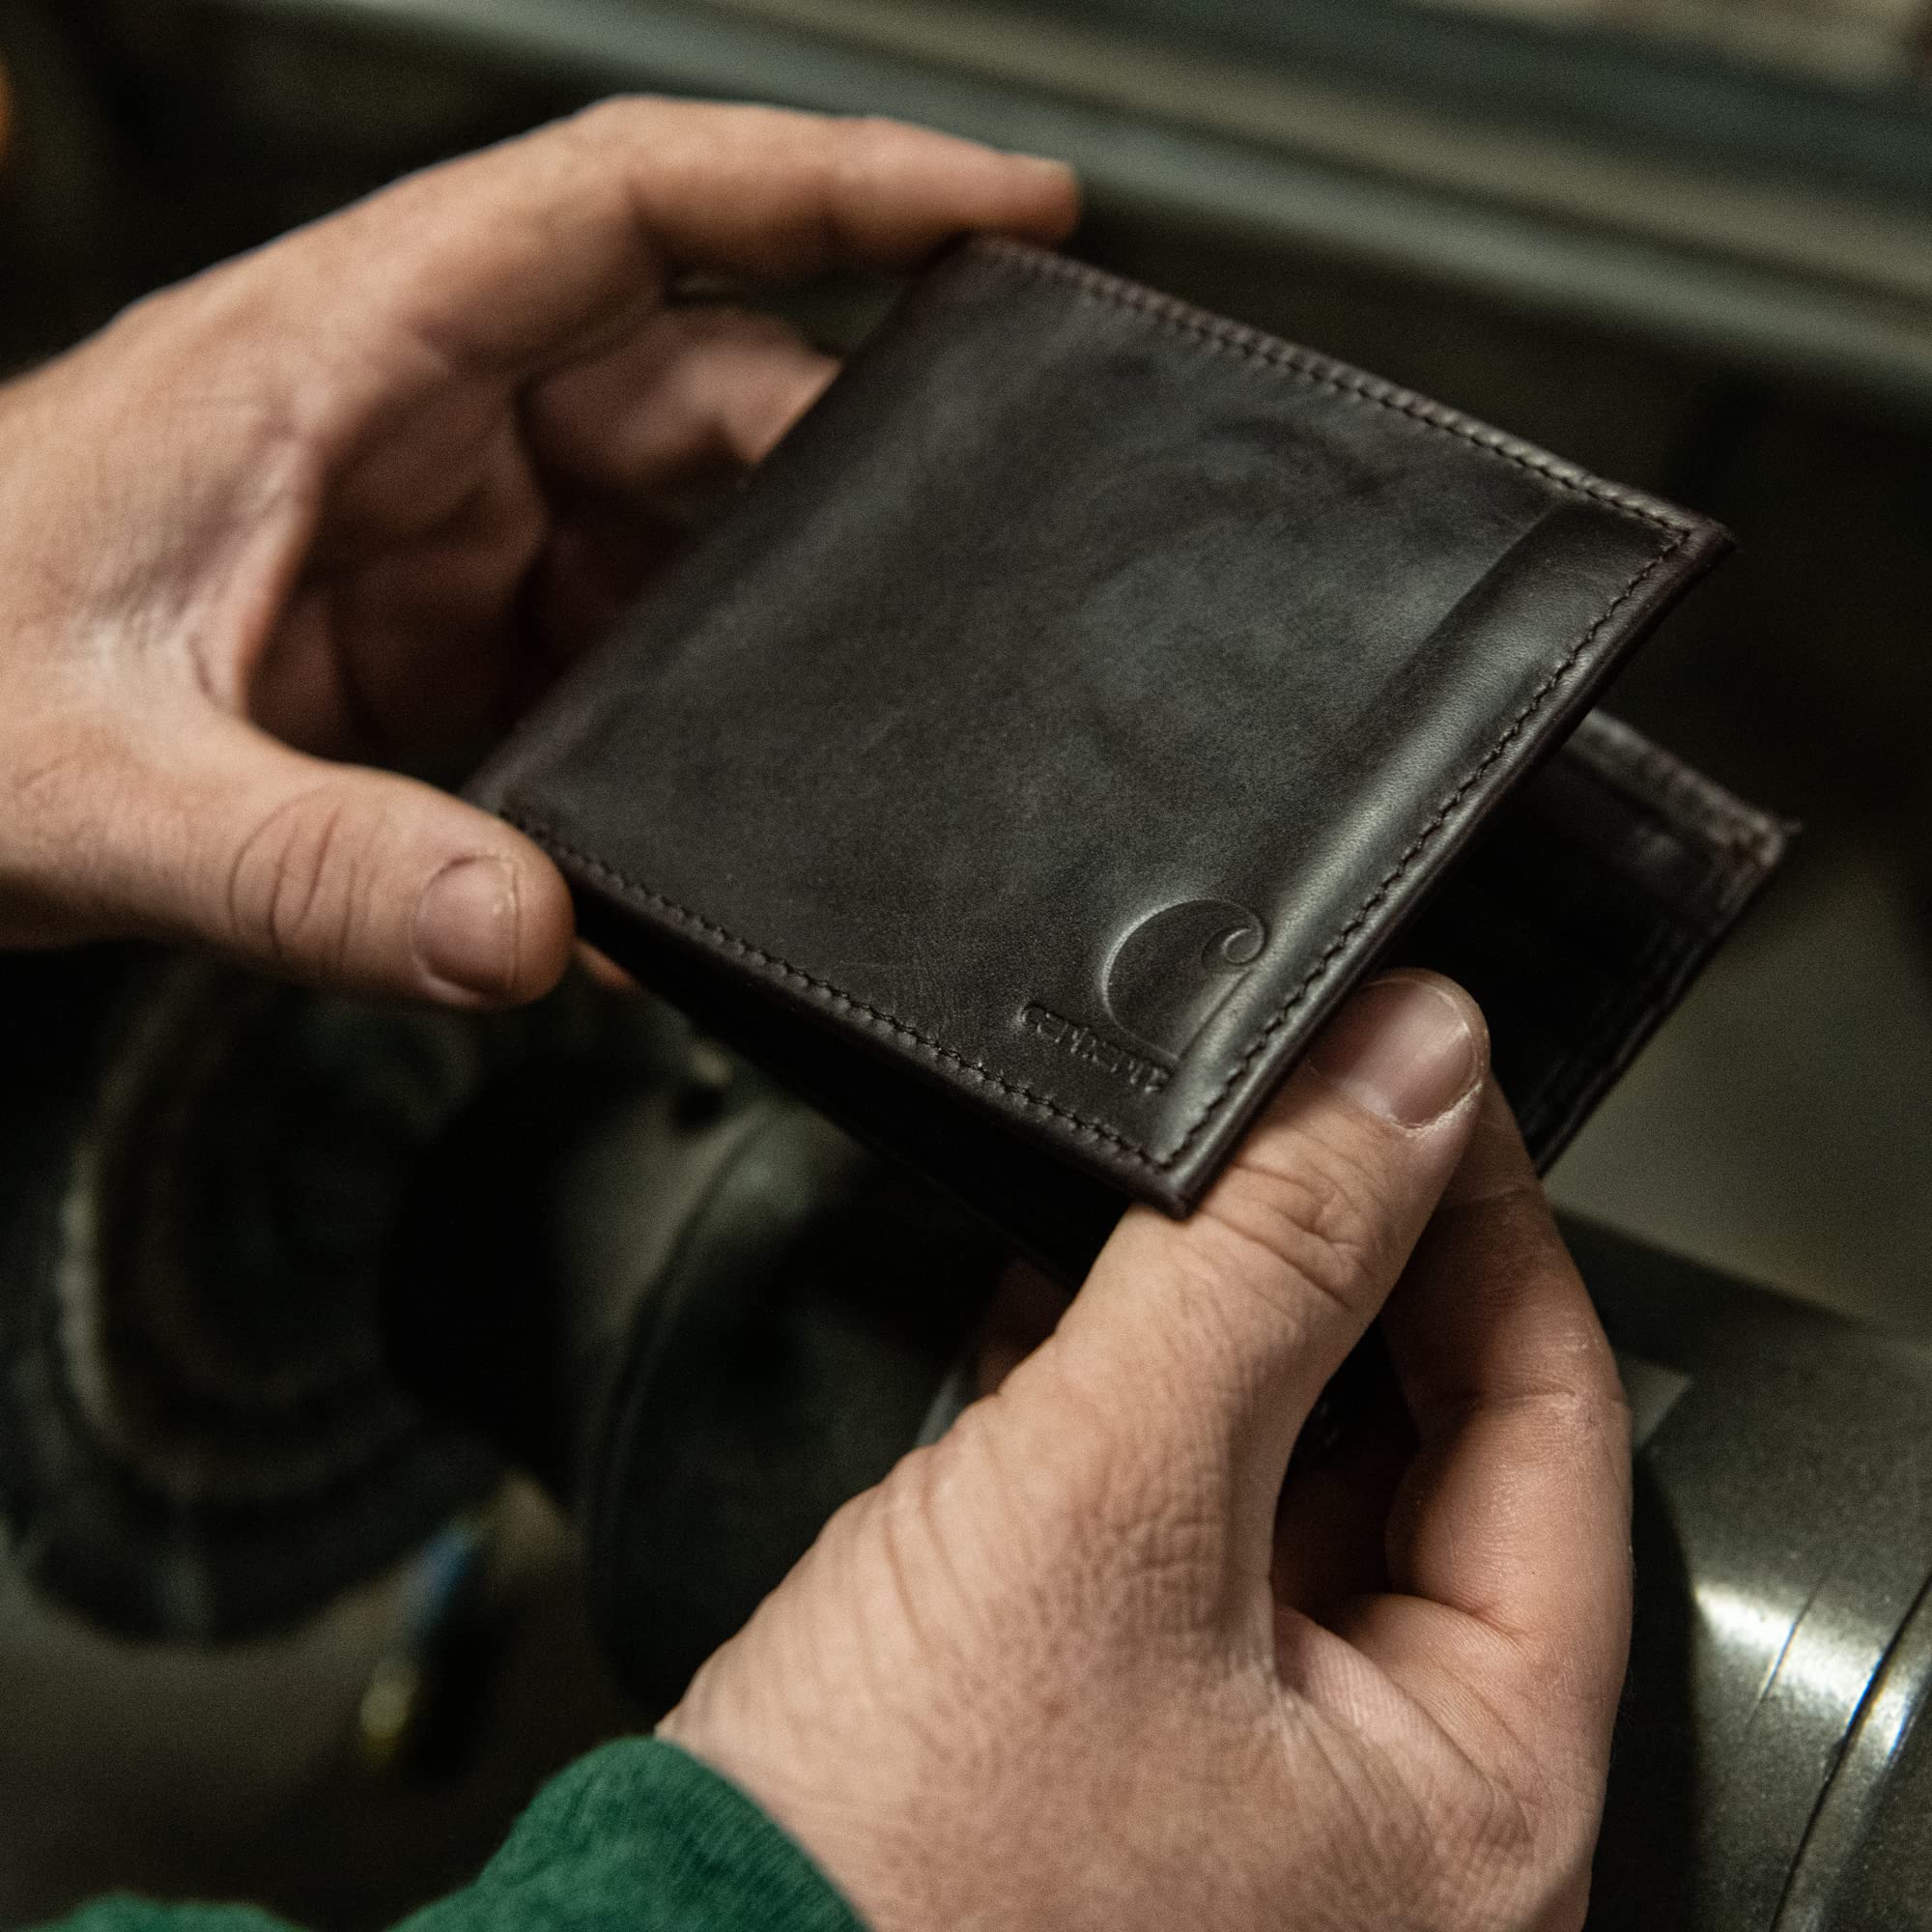 Carhartt Men's Billfold and Passcase Wallets, Durable Bifold Wallets, Available in Leather and Canvas Styles